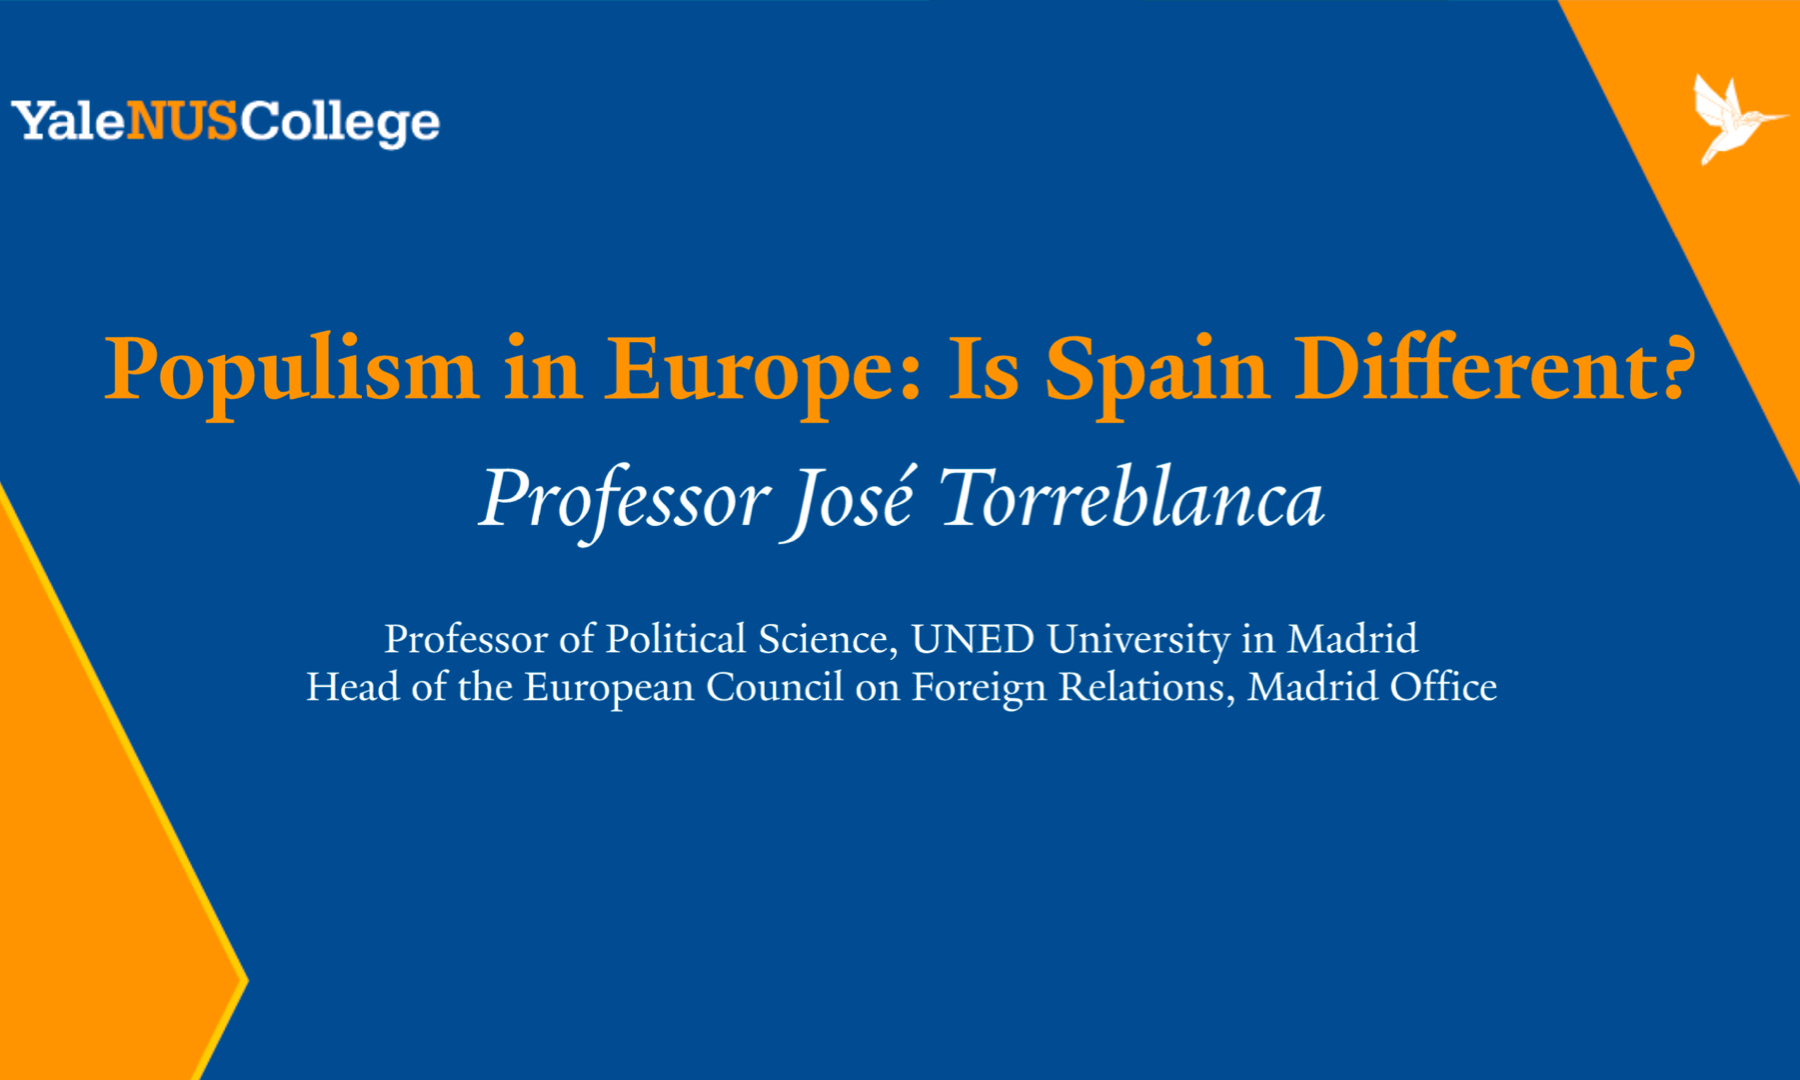 Populism In Europe: Is Spain Different?